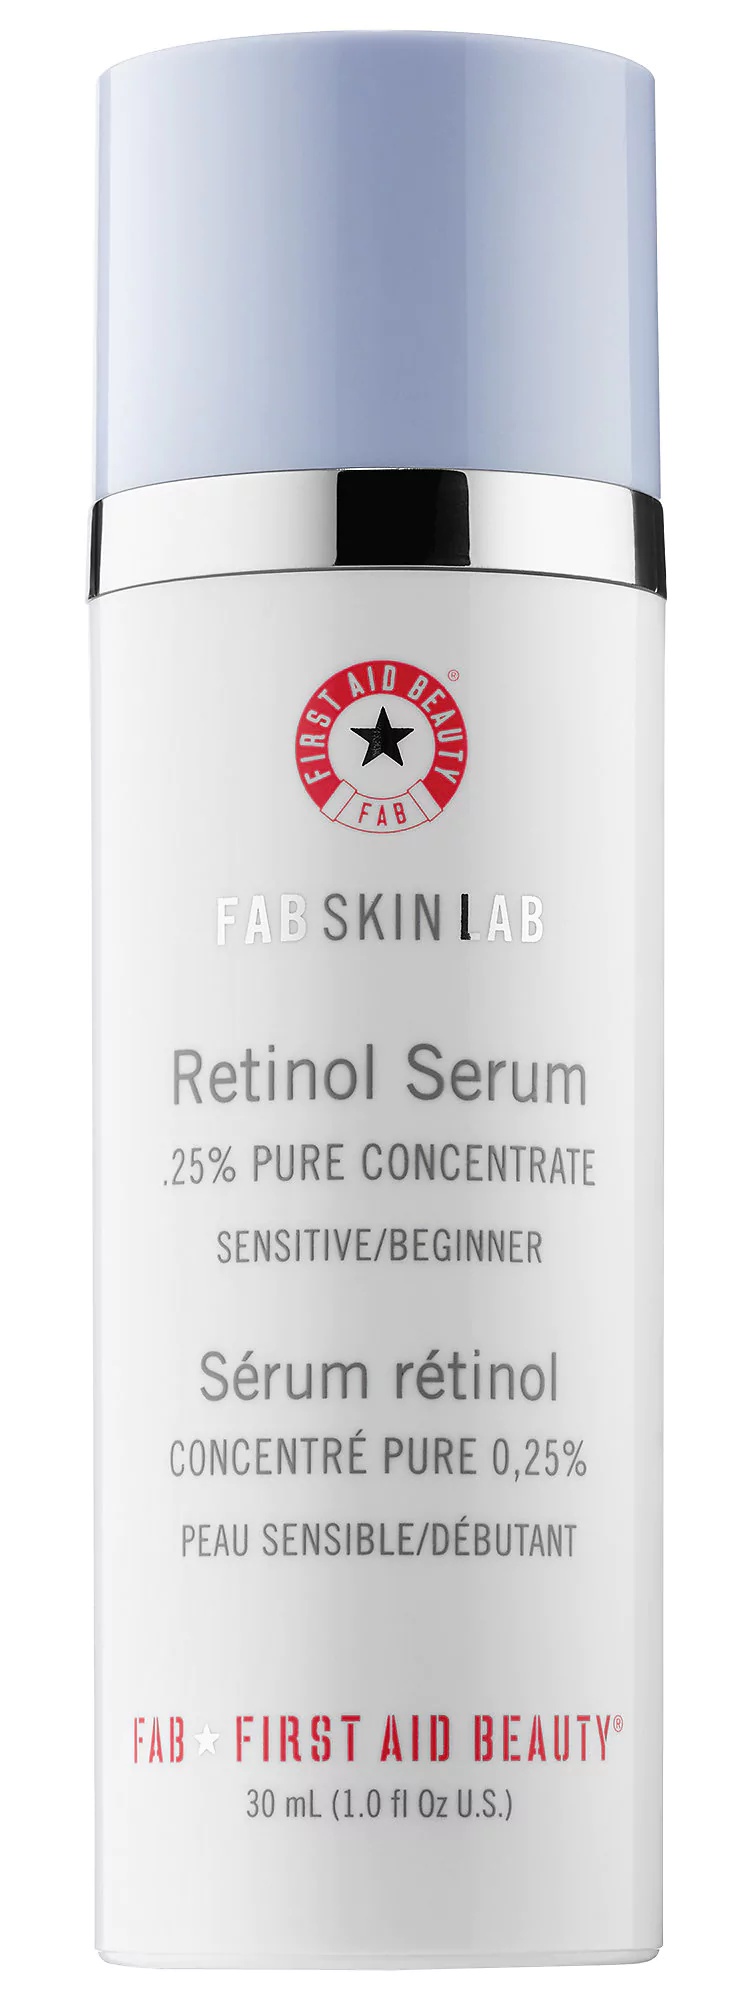 First Aid Beauty Fab Skin Lab Retinol Serum 0.25% Pure Concentrate